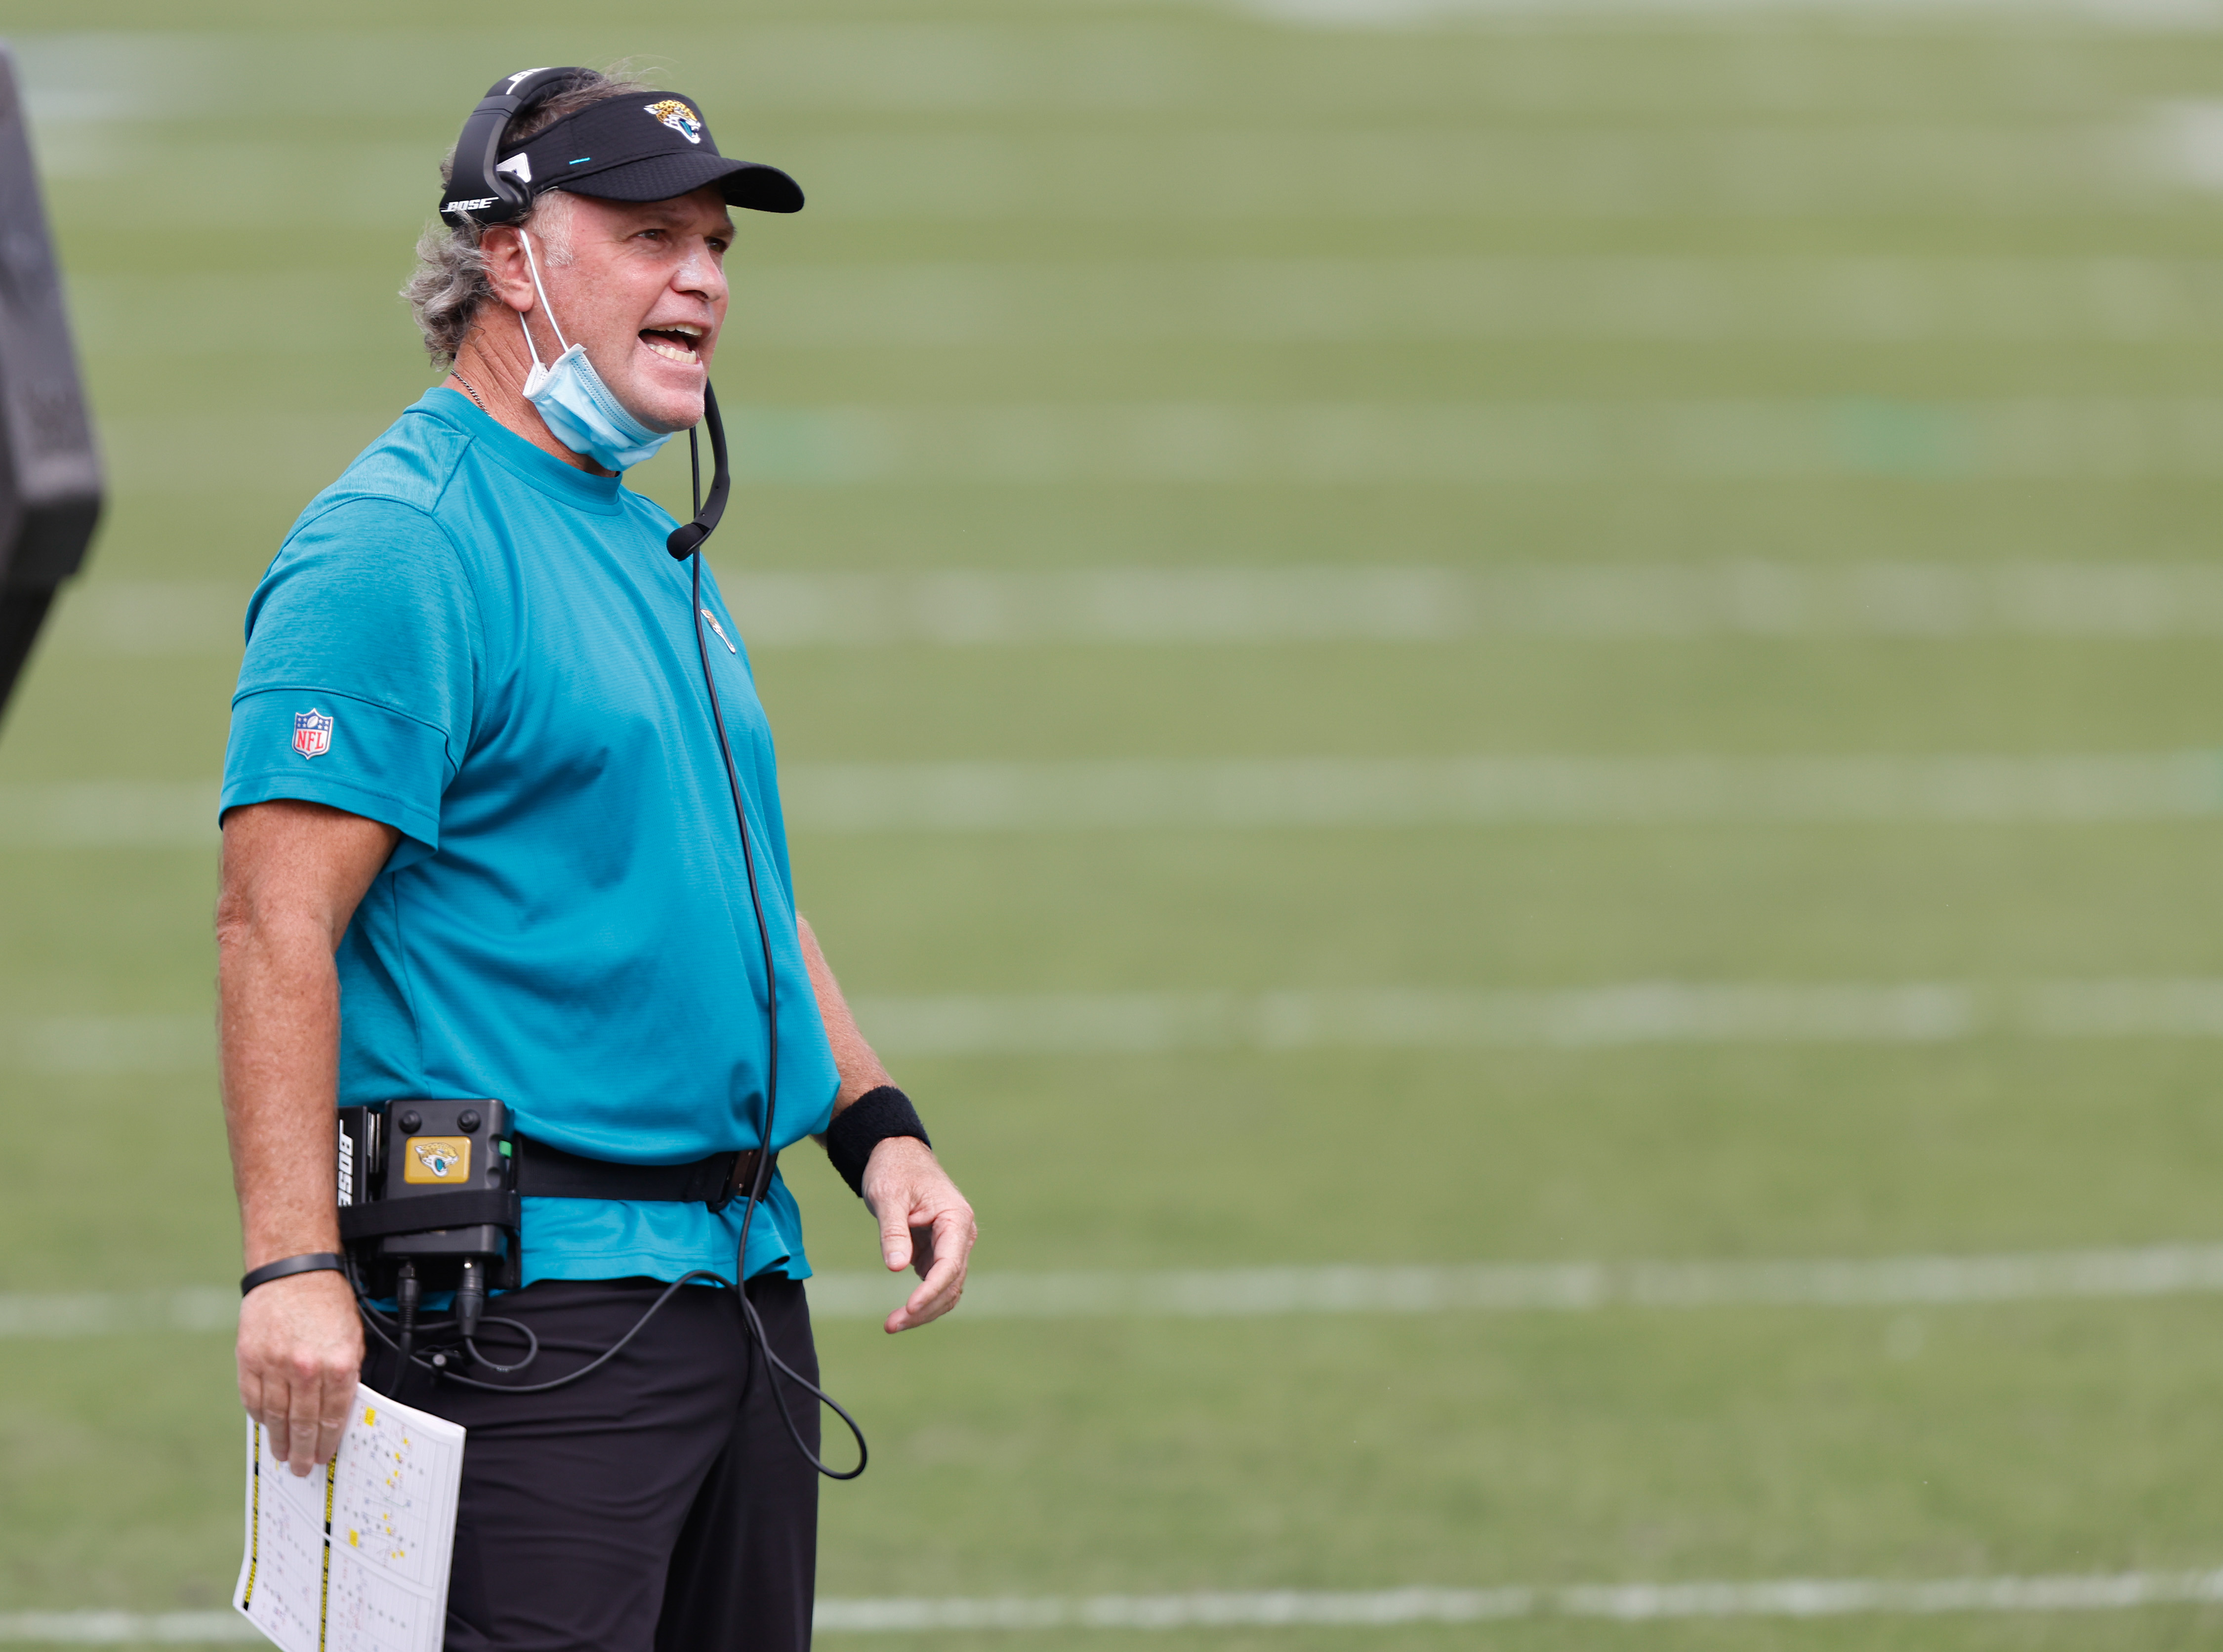 Joe DeCamillis talking to someone on the field during a game with the Jacksonville Jaguars (8th Nov., 2020)